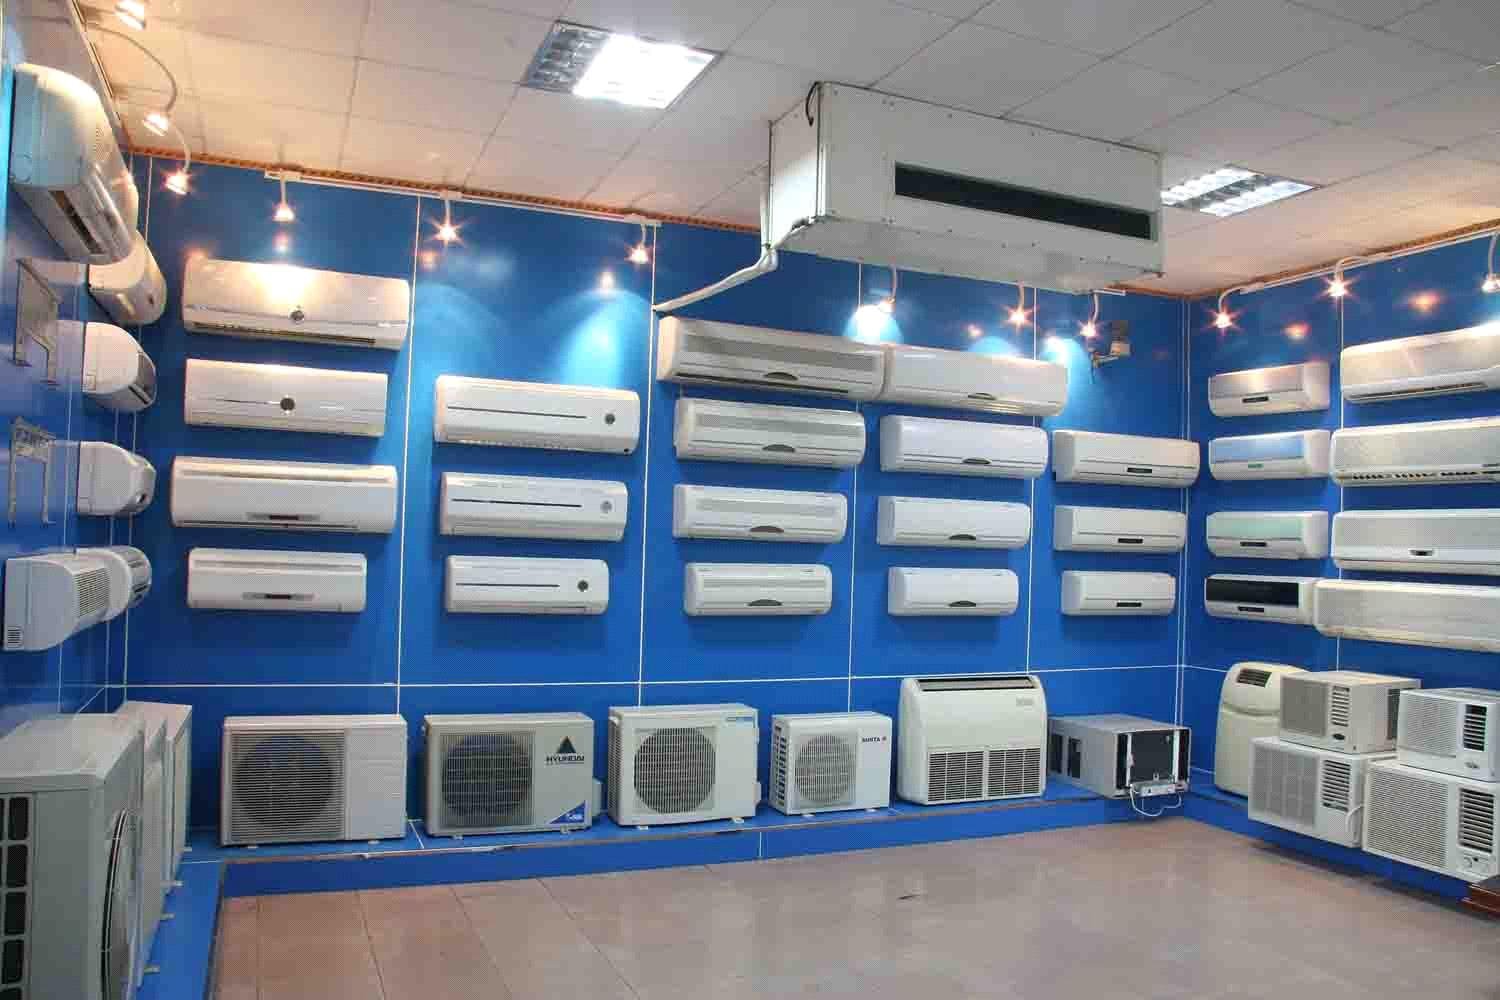 Types Of Air Conditioning Systems - कुल छह तरह के एसी ...